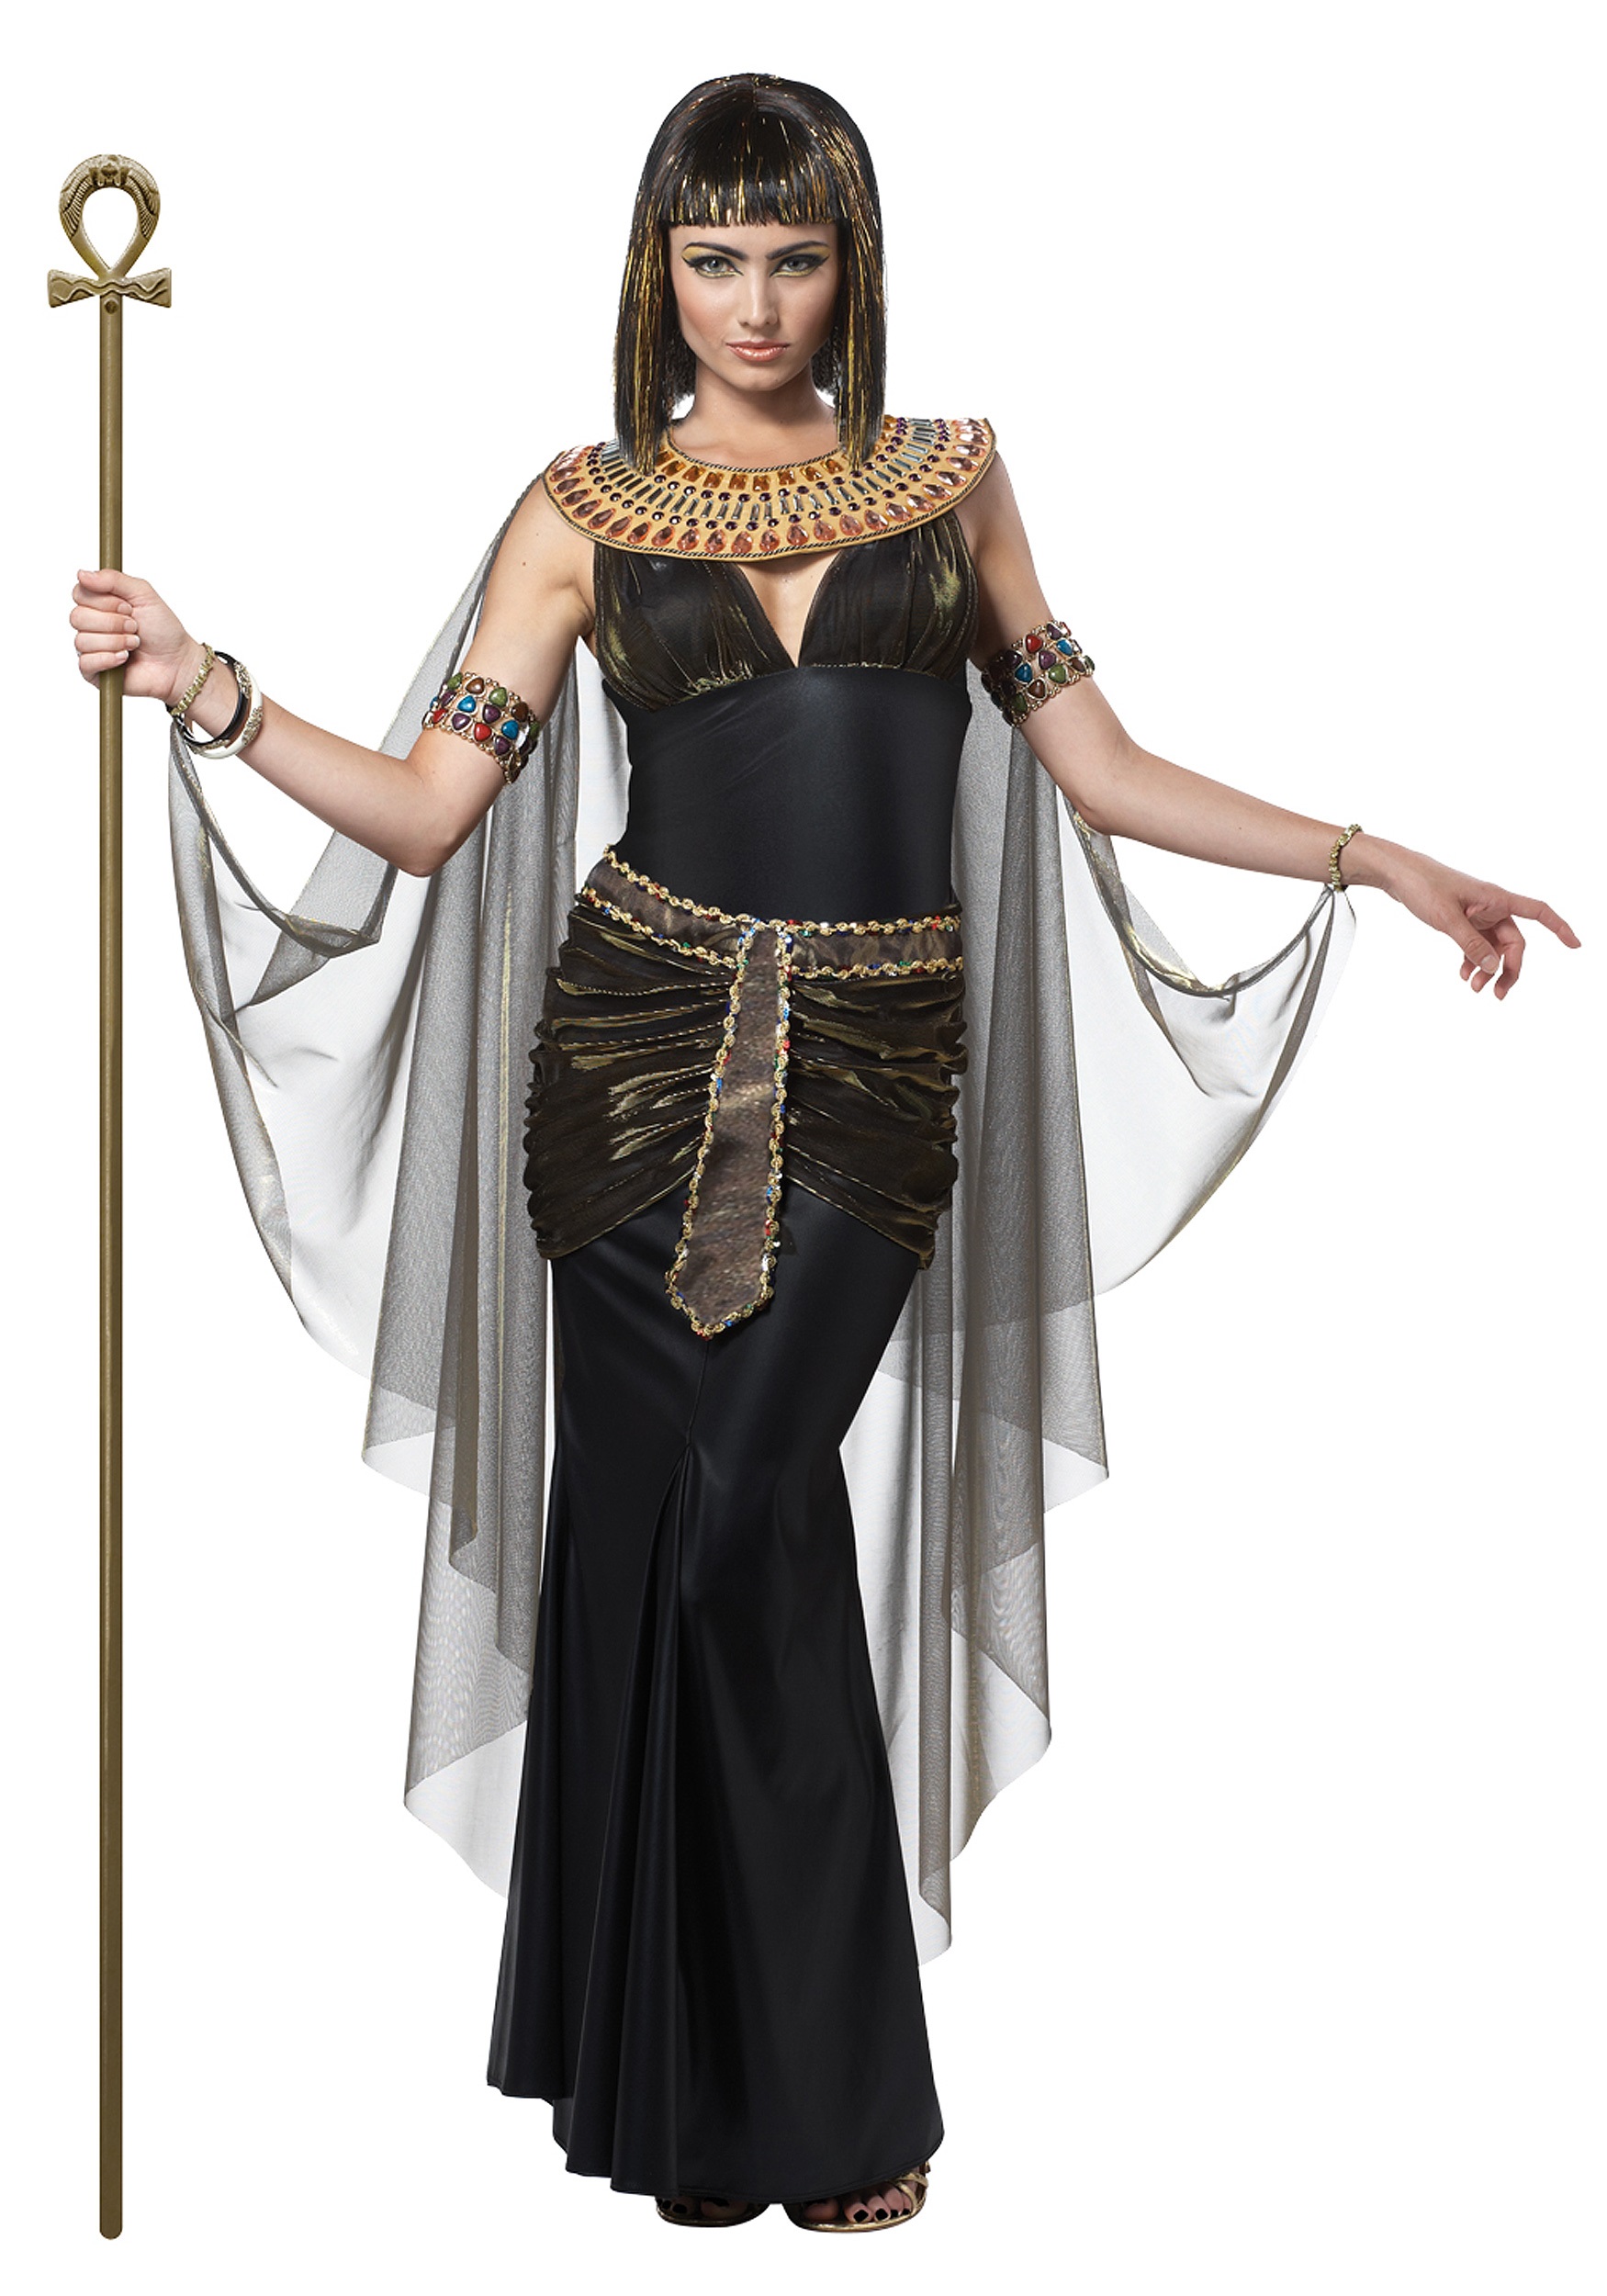 Photos - Fancy Dress California Costume Collection Cleopatra Costume for Women | Women's Histor 